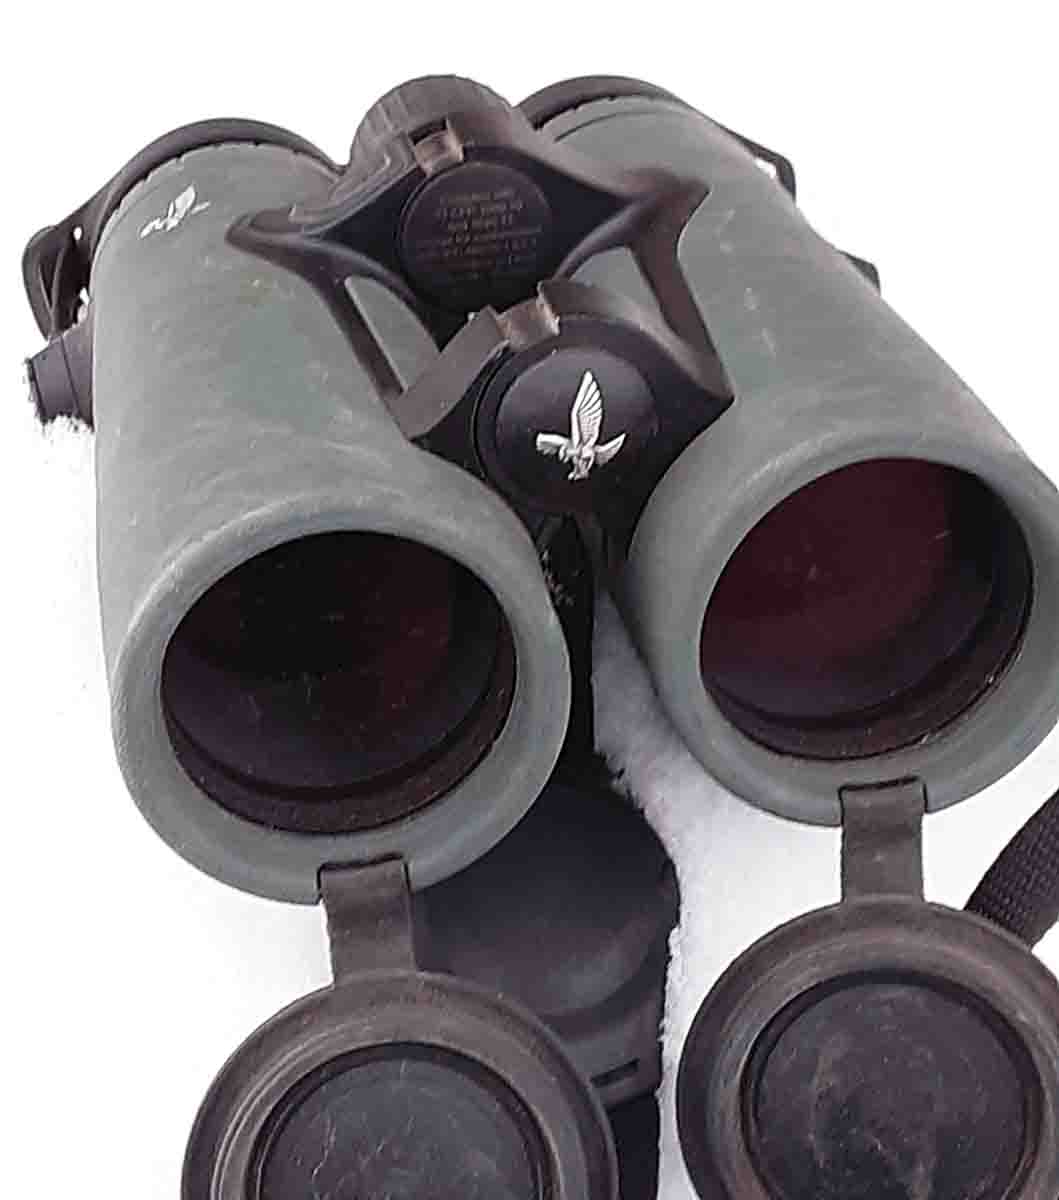 The ocular caps on the binocular pop in and out snuggly, protecting lenses from dust and moisture.